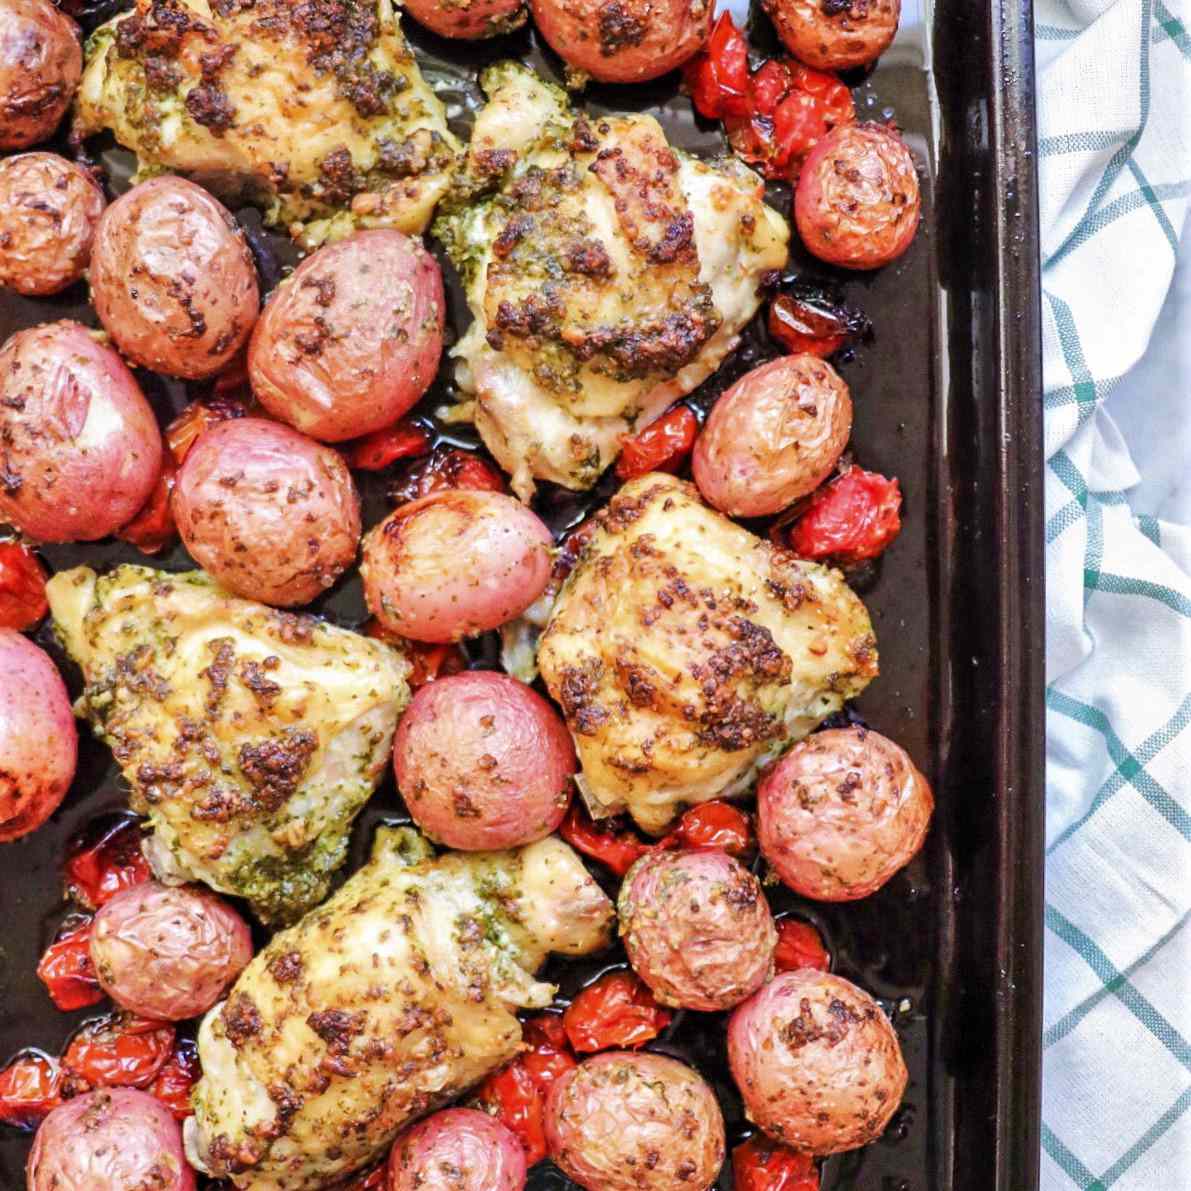 Sheet pan with baked chicken thighs and potatoes tossed in pesto